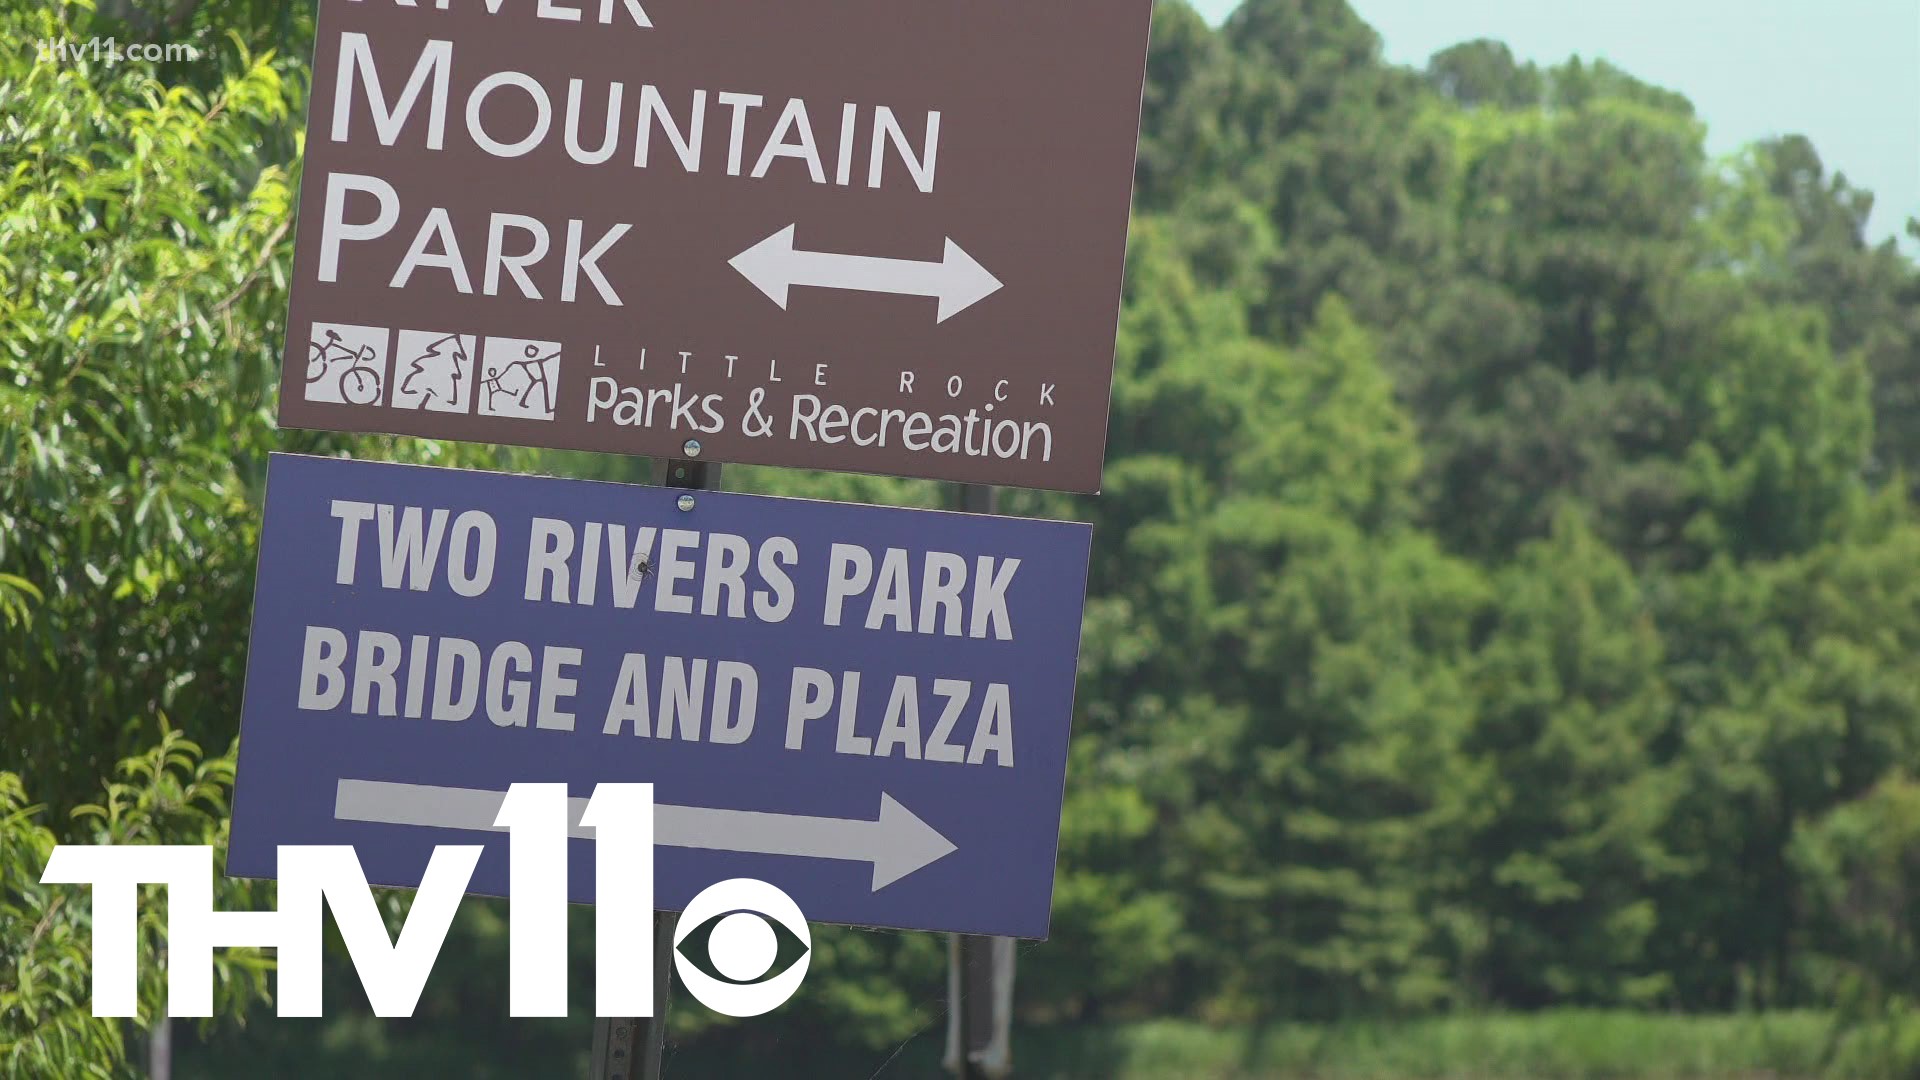 In Little Rock, hiking and biking trails are beginning to become tourist attractions.